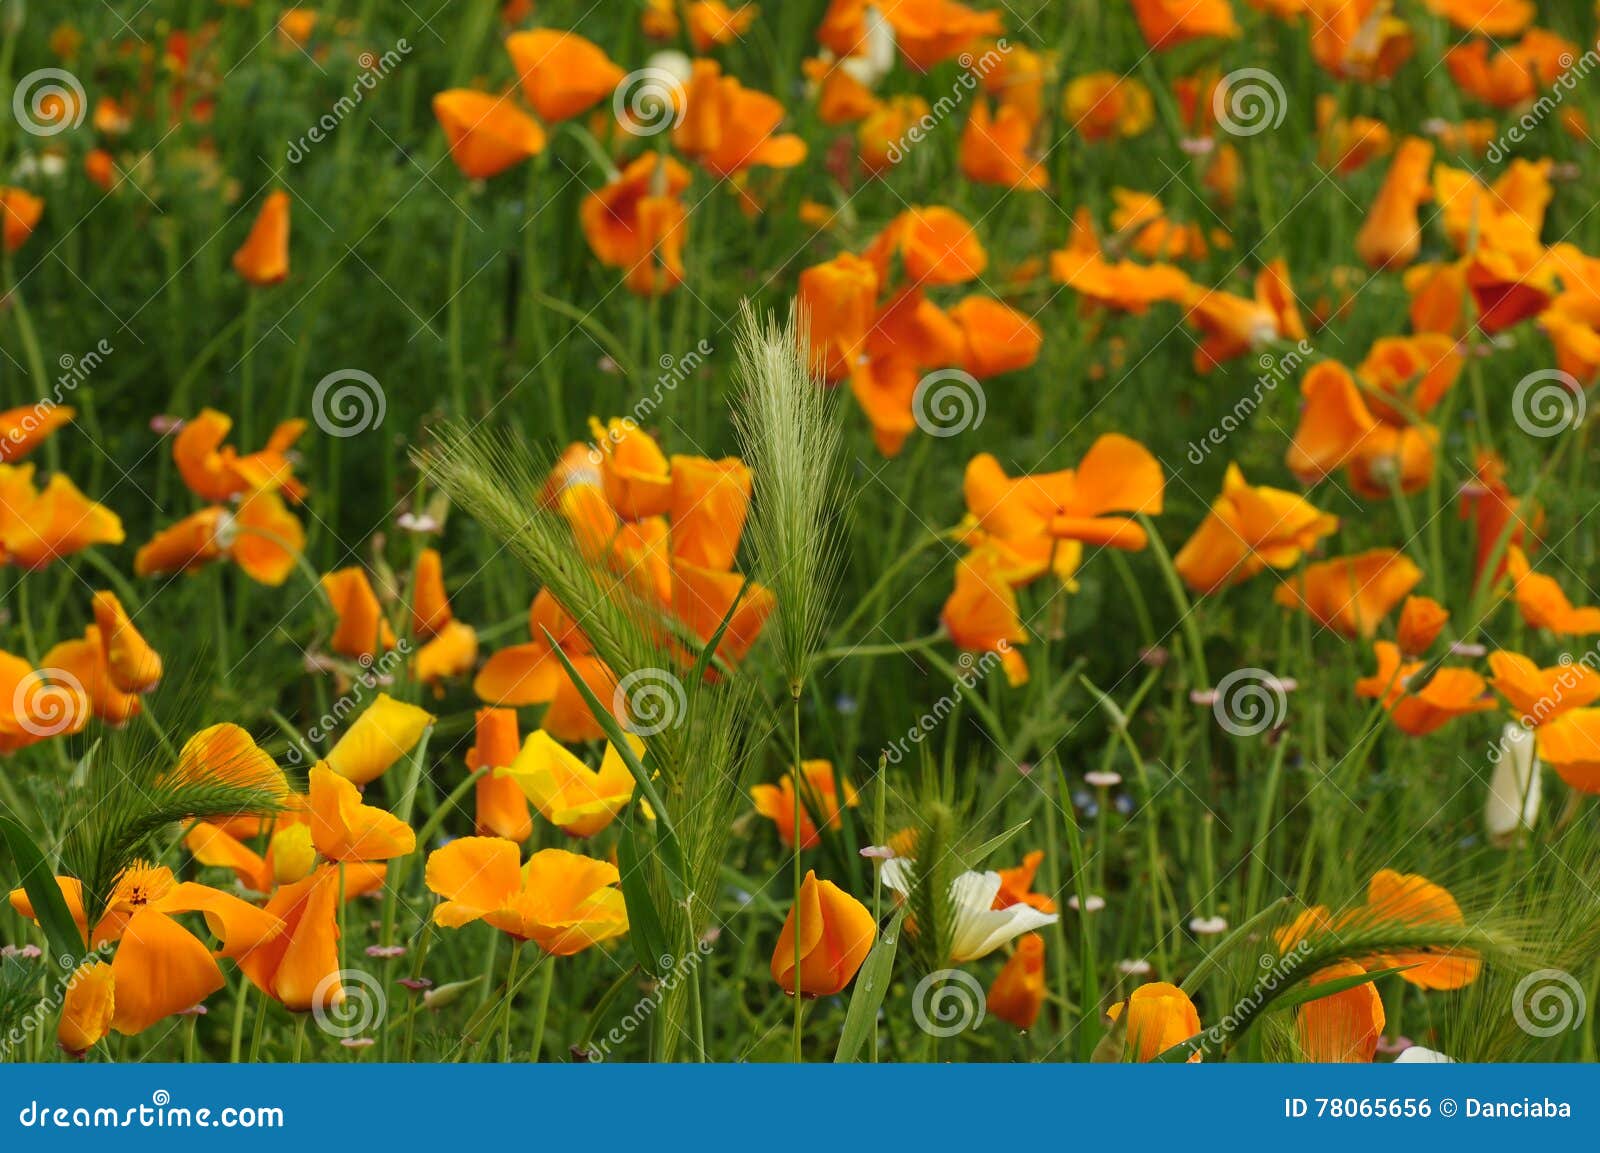 blooming mexican gold poppies in a garden in florence